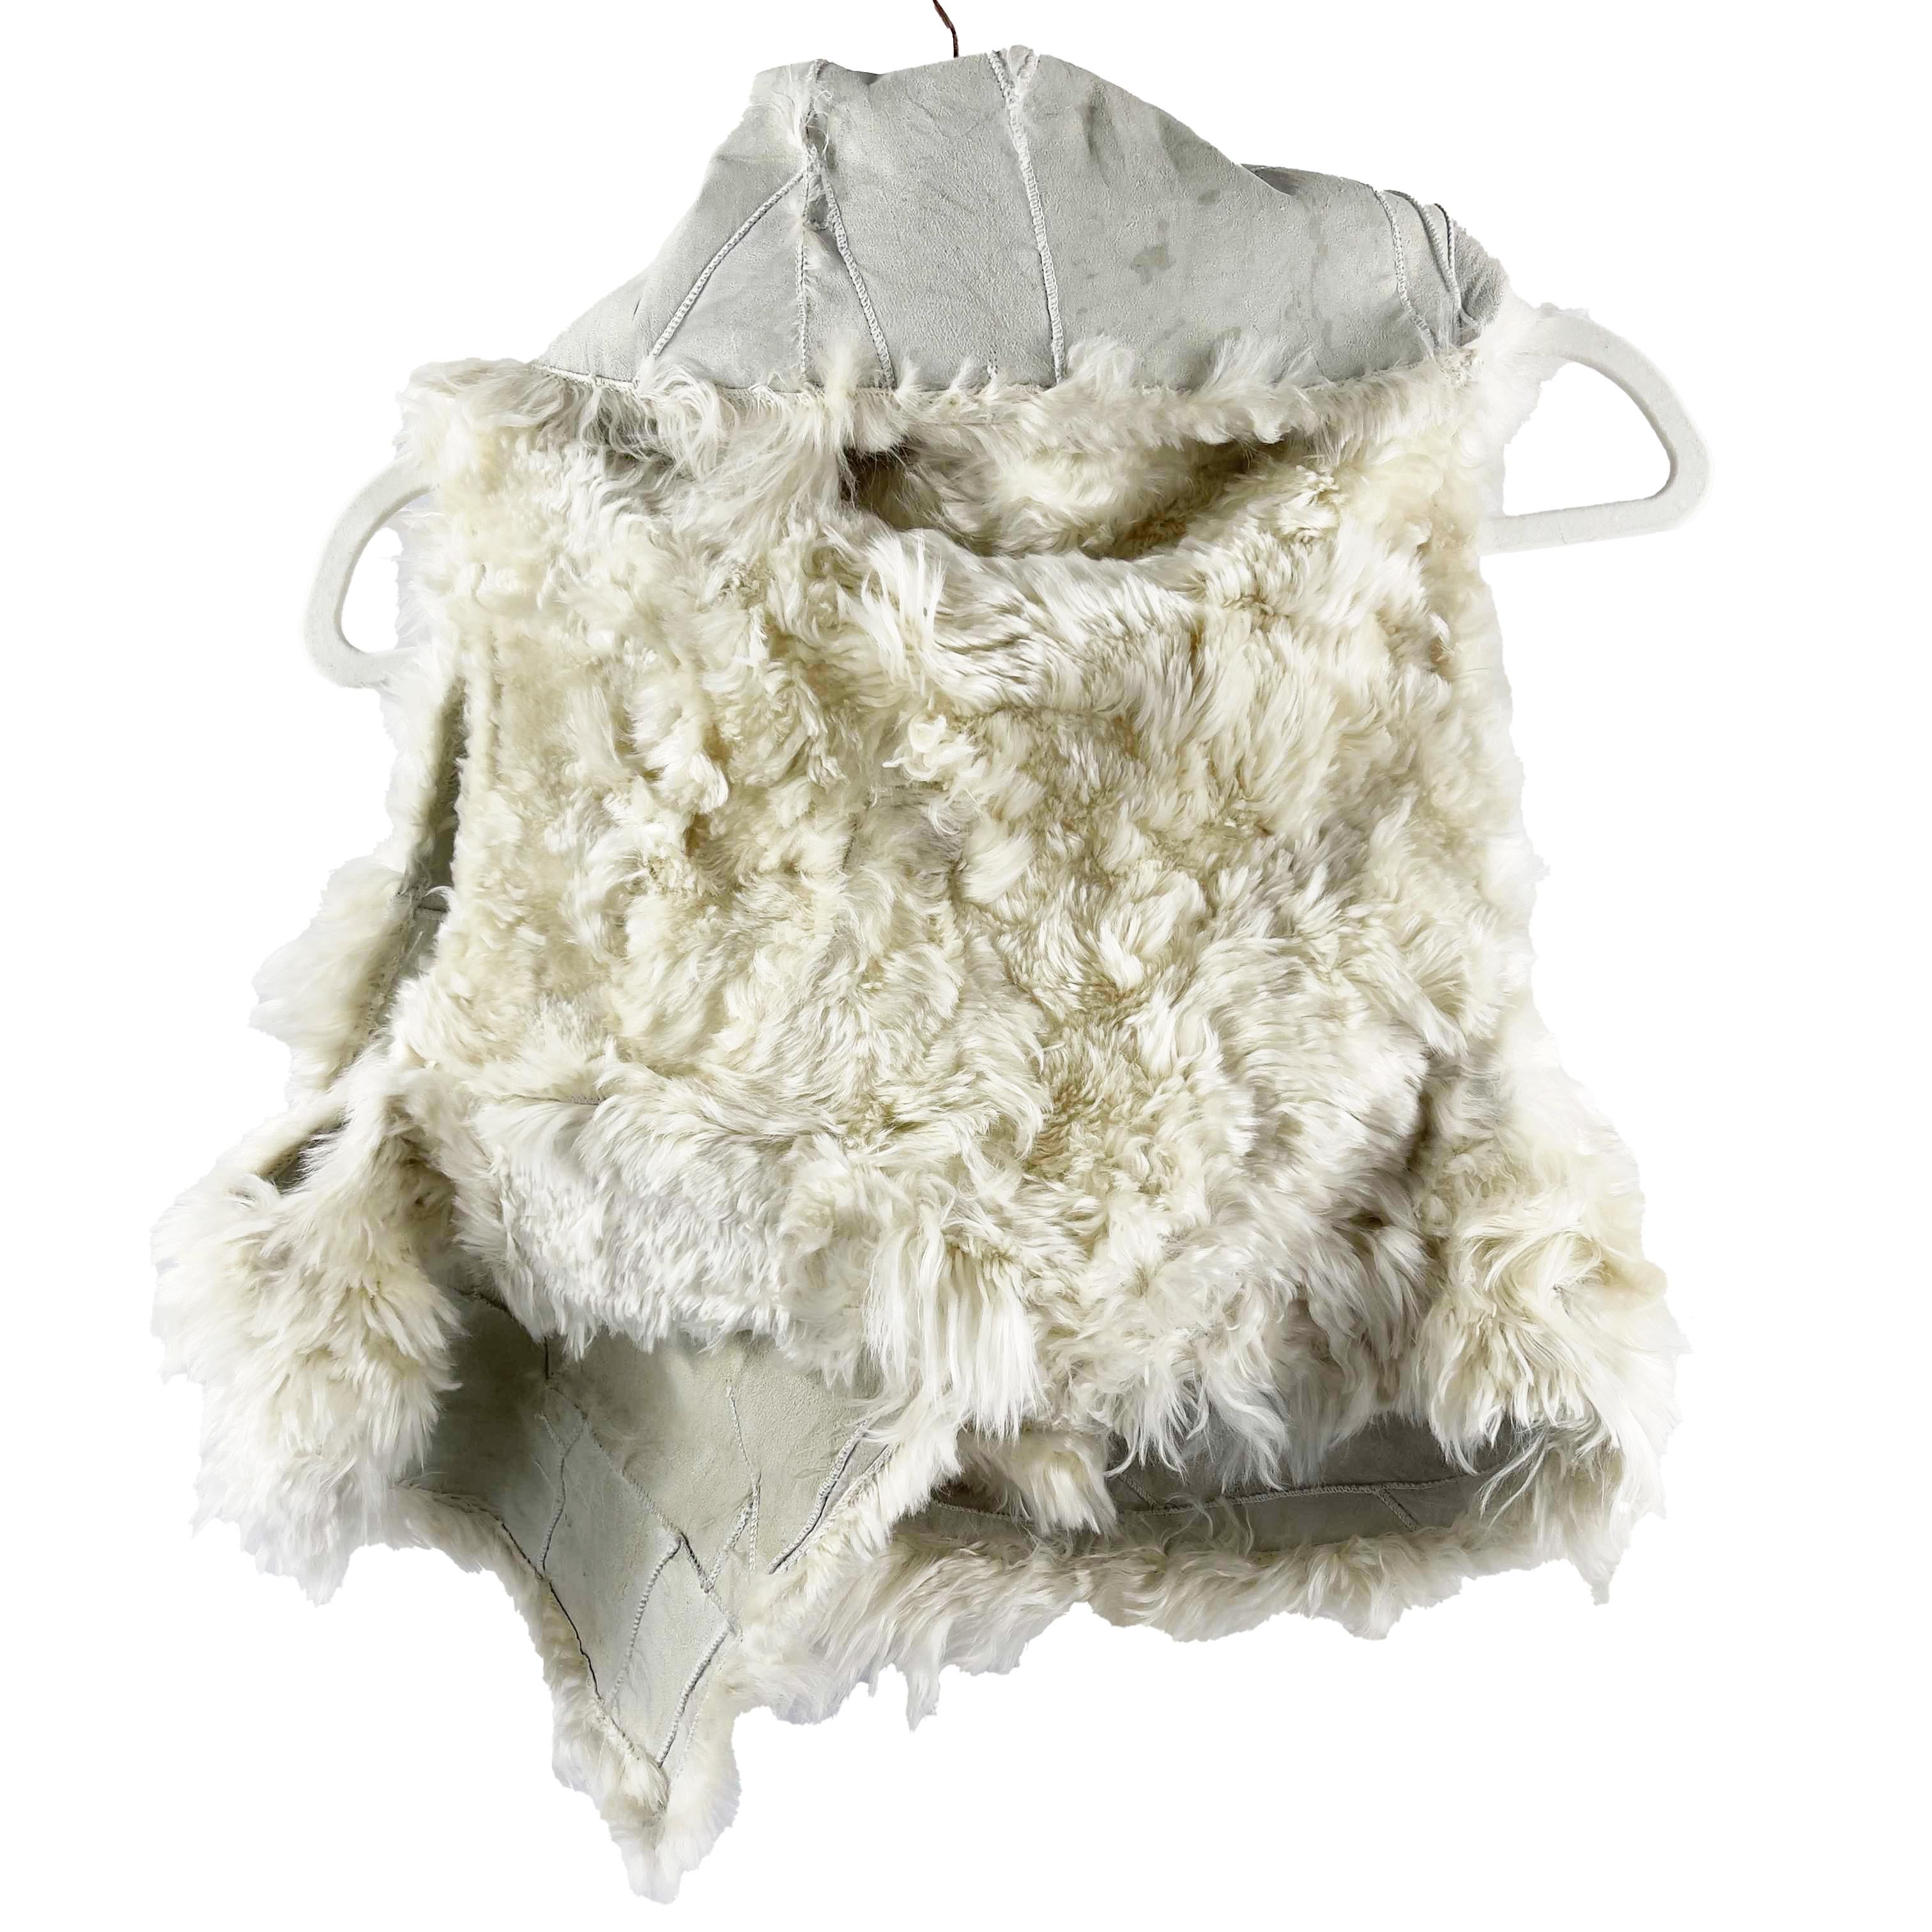 Ann Demeulemeester- Llama Shearling Fur Vest Jacket - Ivory - Size M 

Description

After graduating from the Royal Academy of Fine Arts in the late '80s, Ann Demeulemeester became known as part of the Antwerp Six, a group of radical new designers